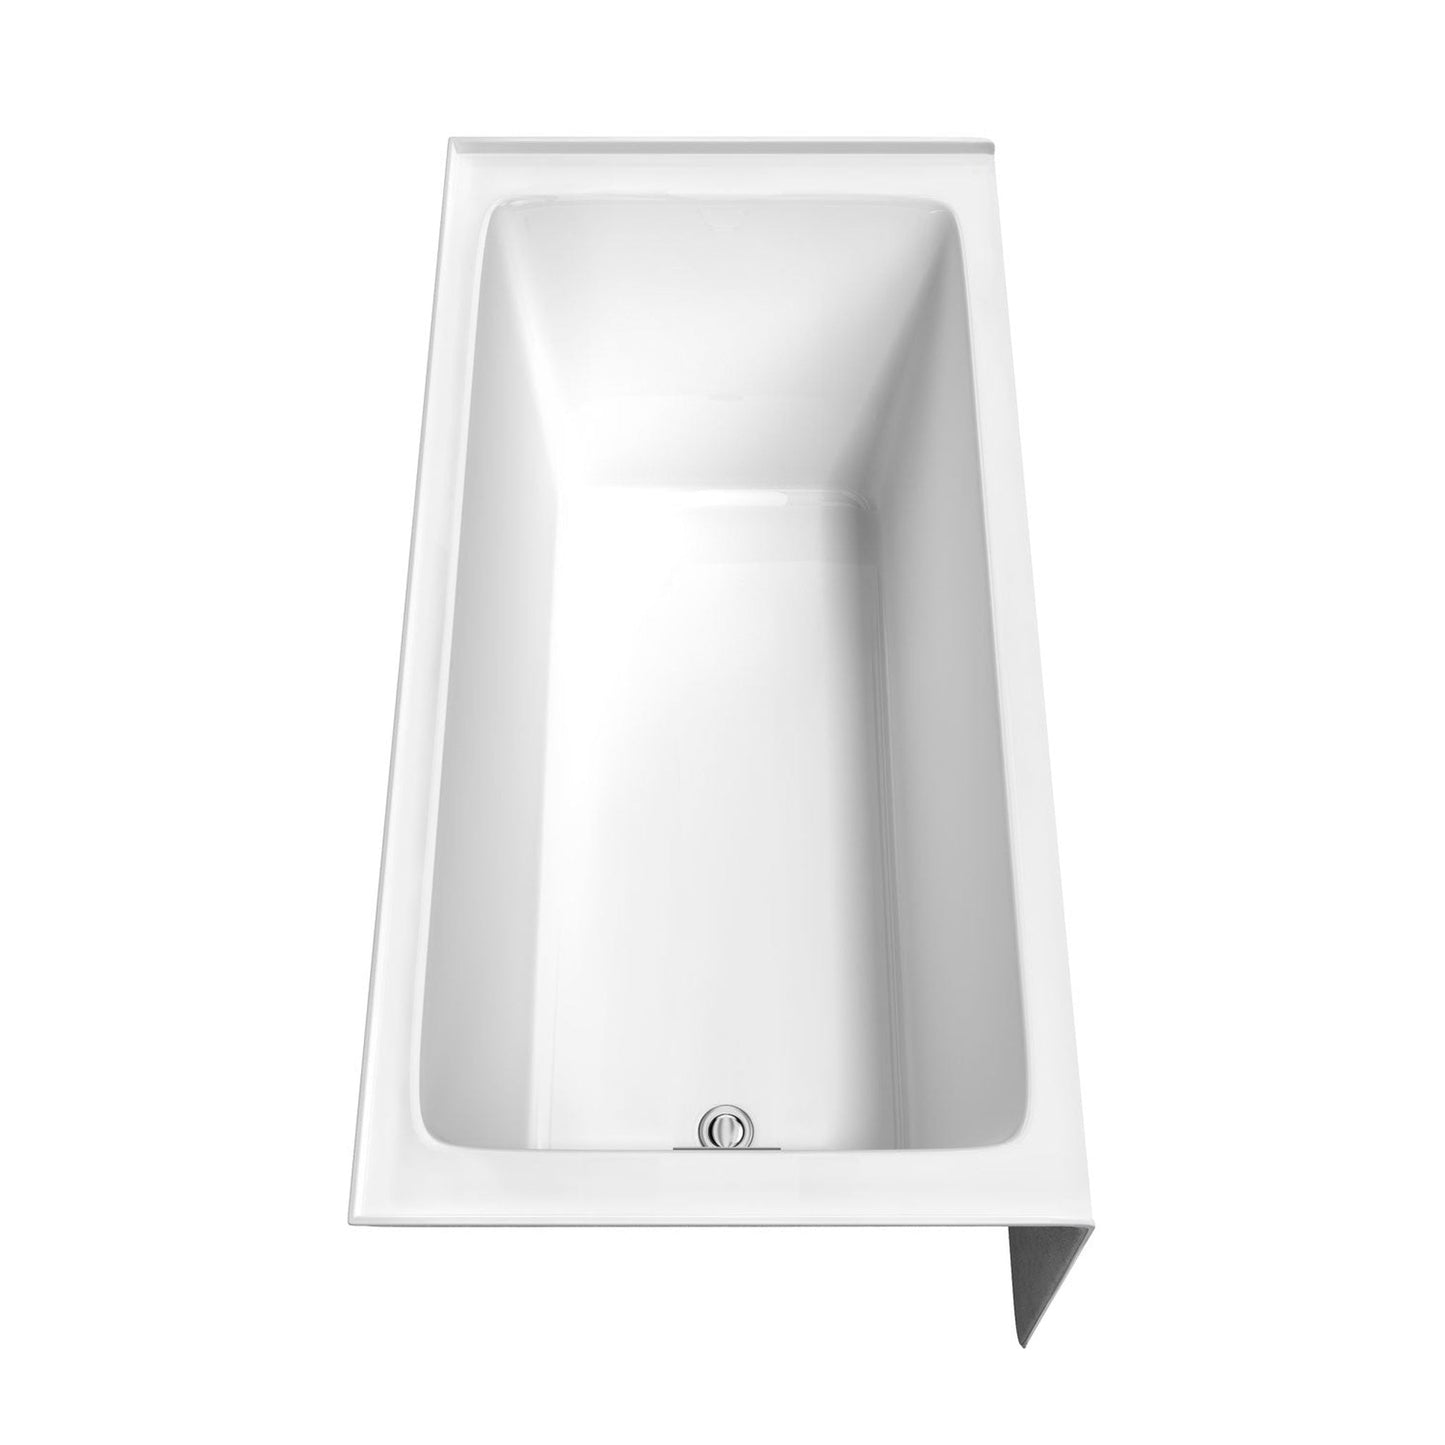 Wyndham Collection Grayley 60" x 30" Alcove Bathtub in White With Left-Hand Drain and Overflow Trim in Polished Chrome